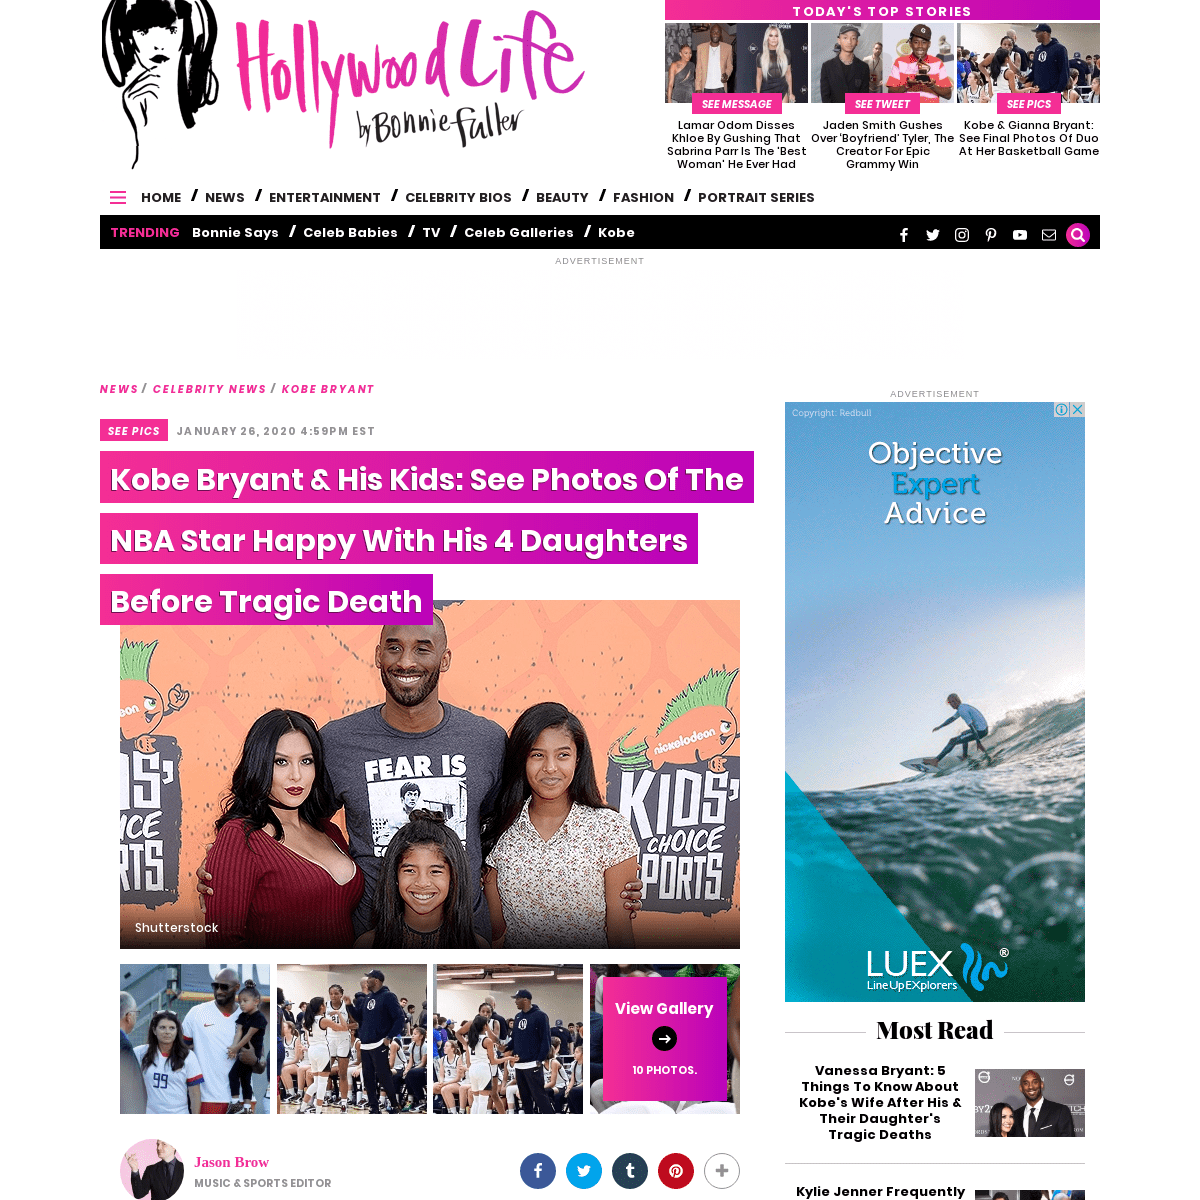 A complete backup of hollywoodlife.com/2020/01/26/kobe-bryant-kids-family-photos/